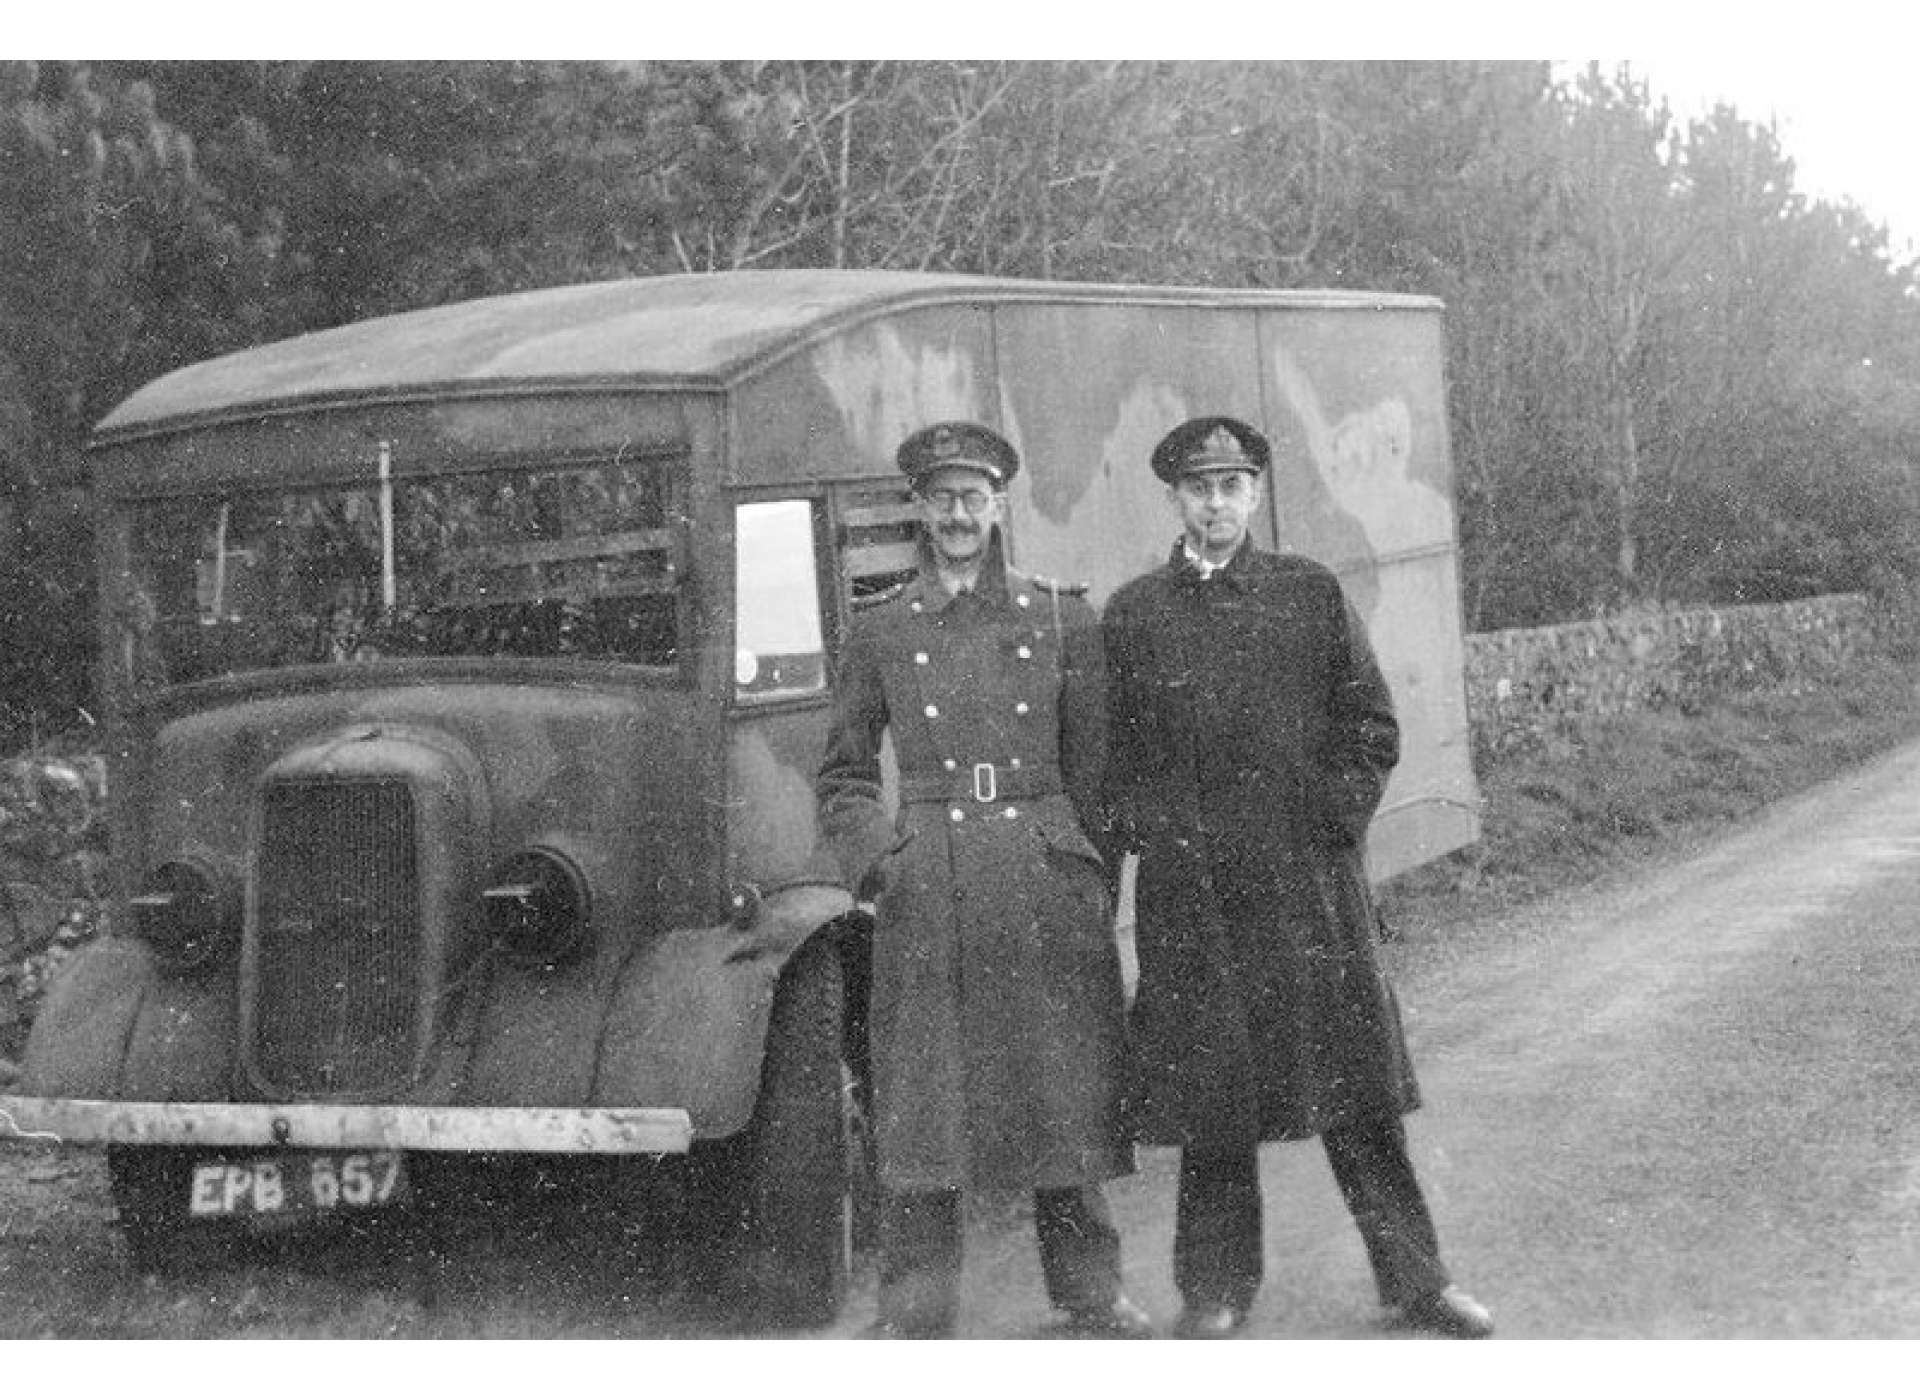 Charles Cholmondeley and Ewen Montagu on 17 April 1943, transporting the body to Scotland